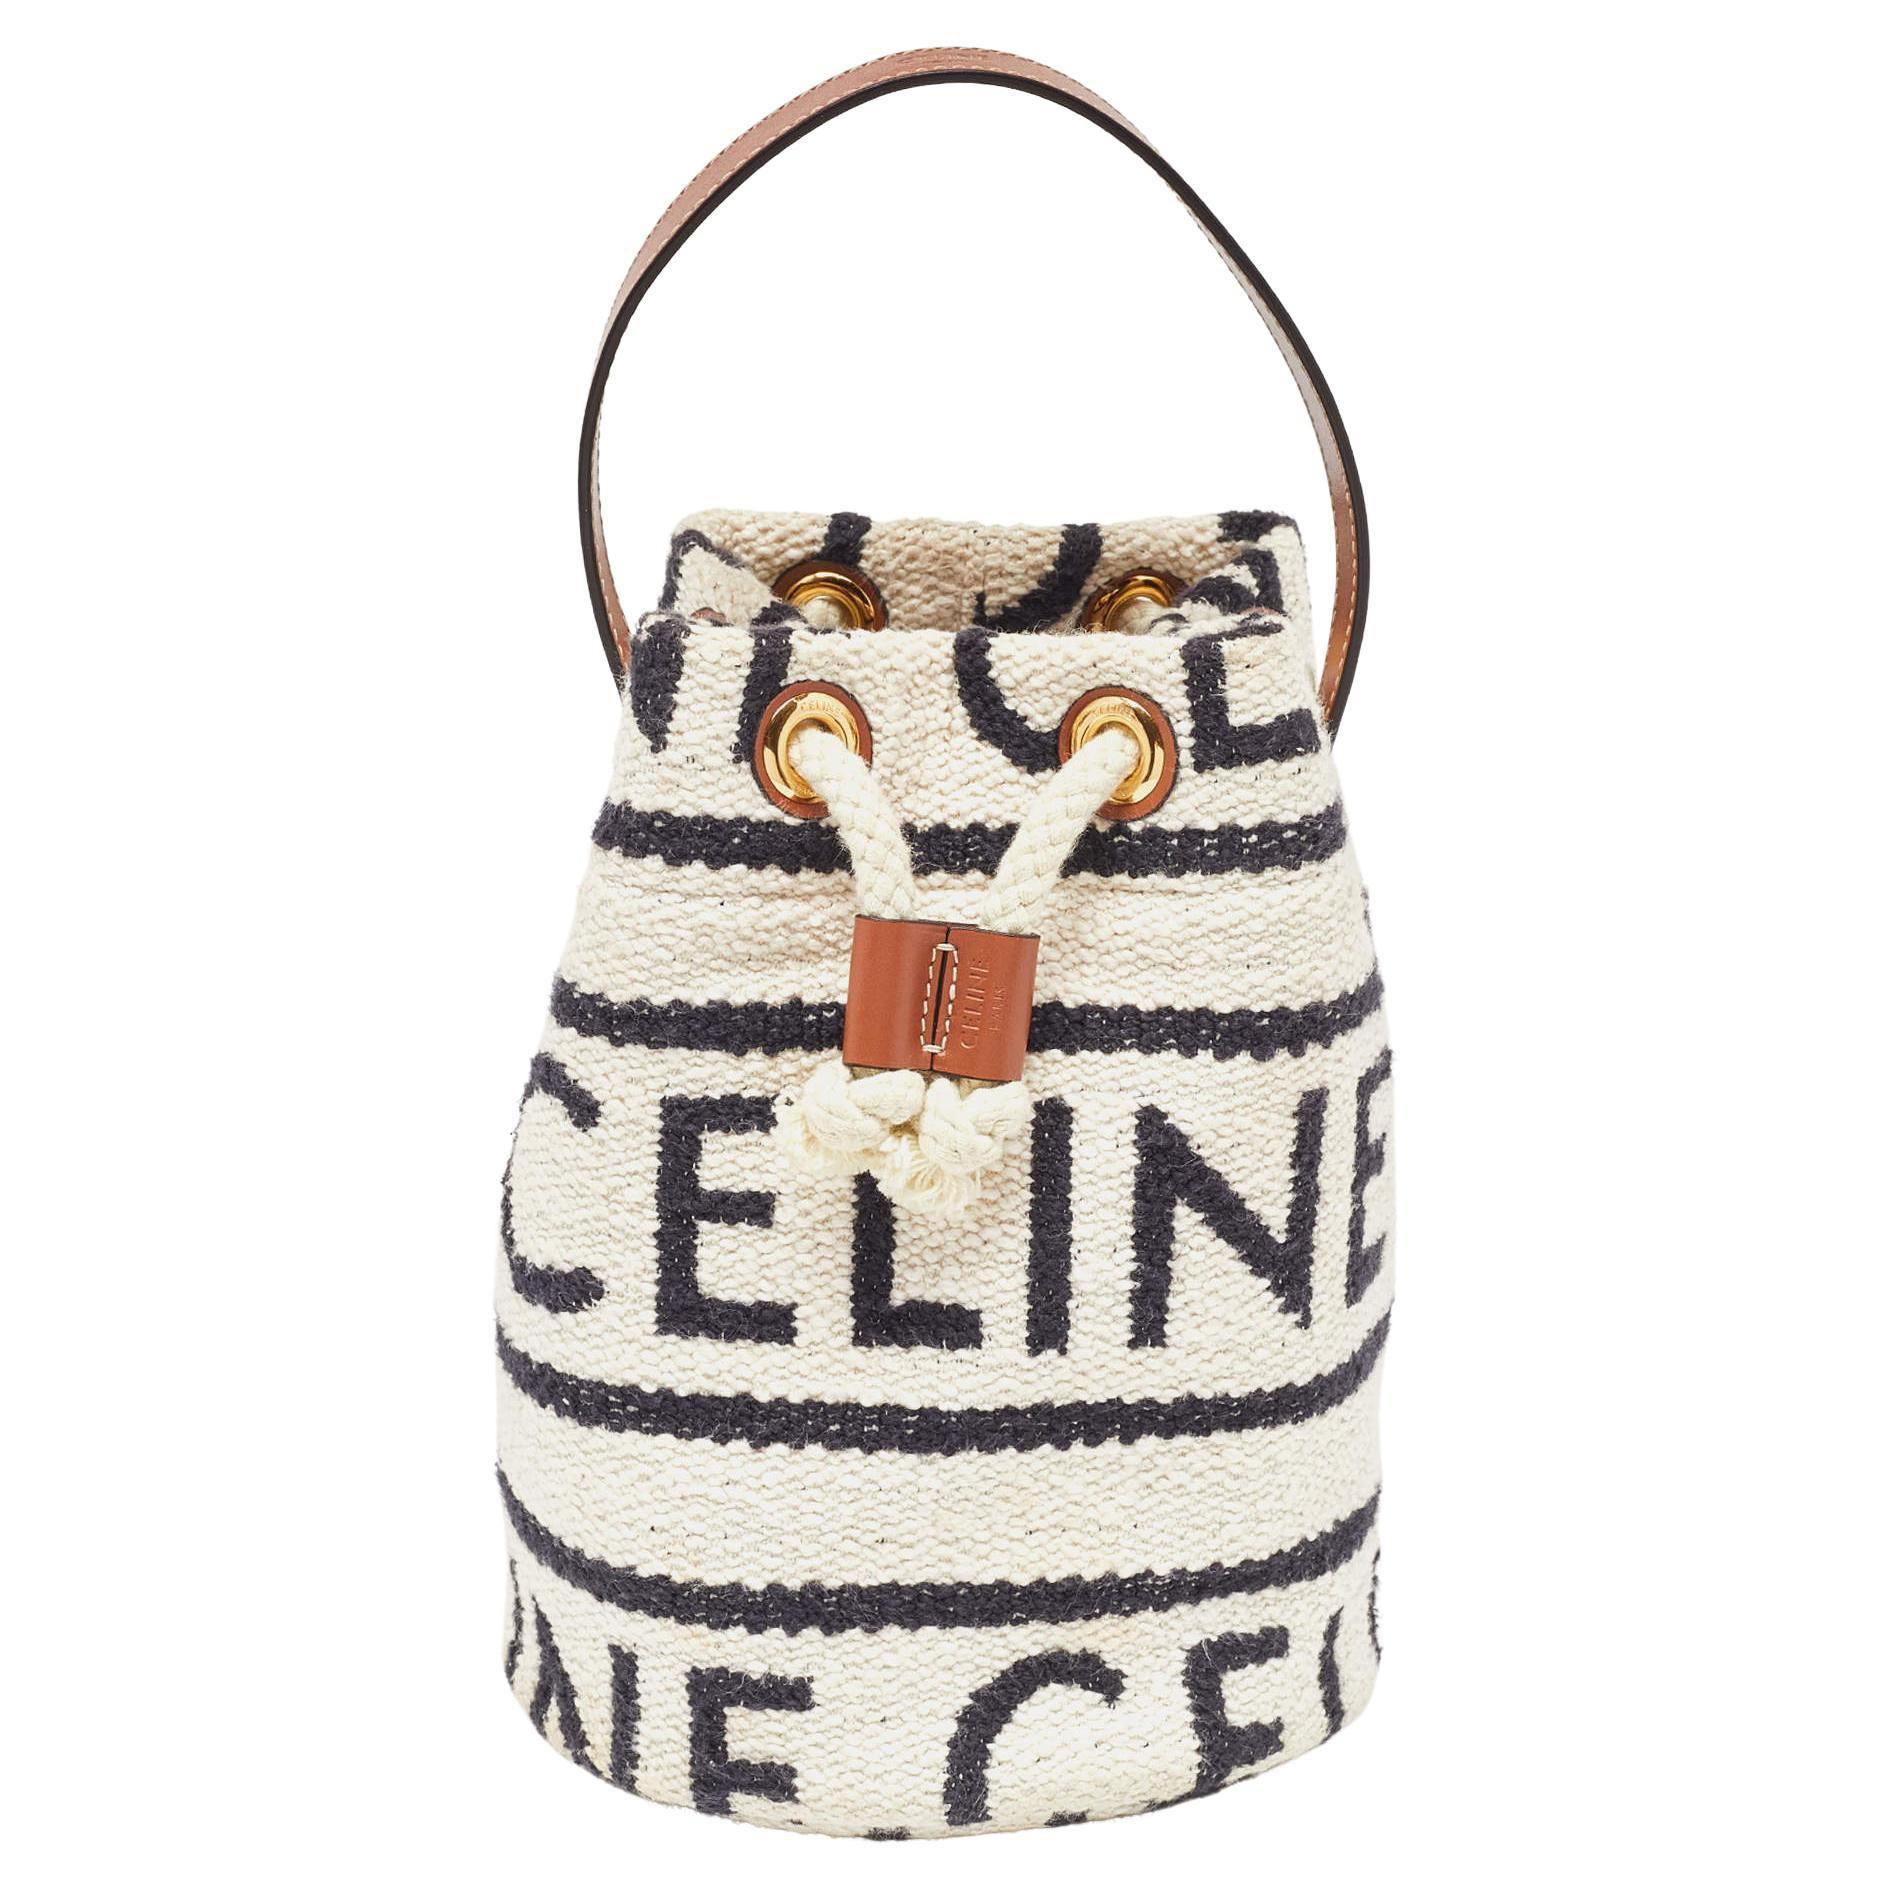 Celine Tricolor Canvas and Leather Striped Teen Drawstring Bag